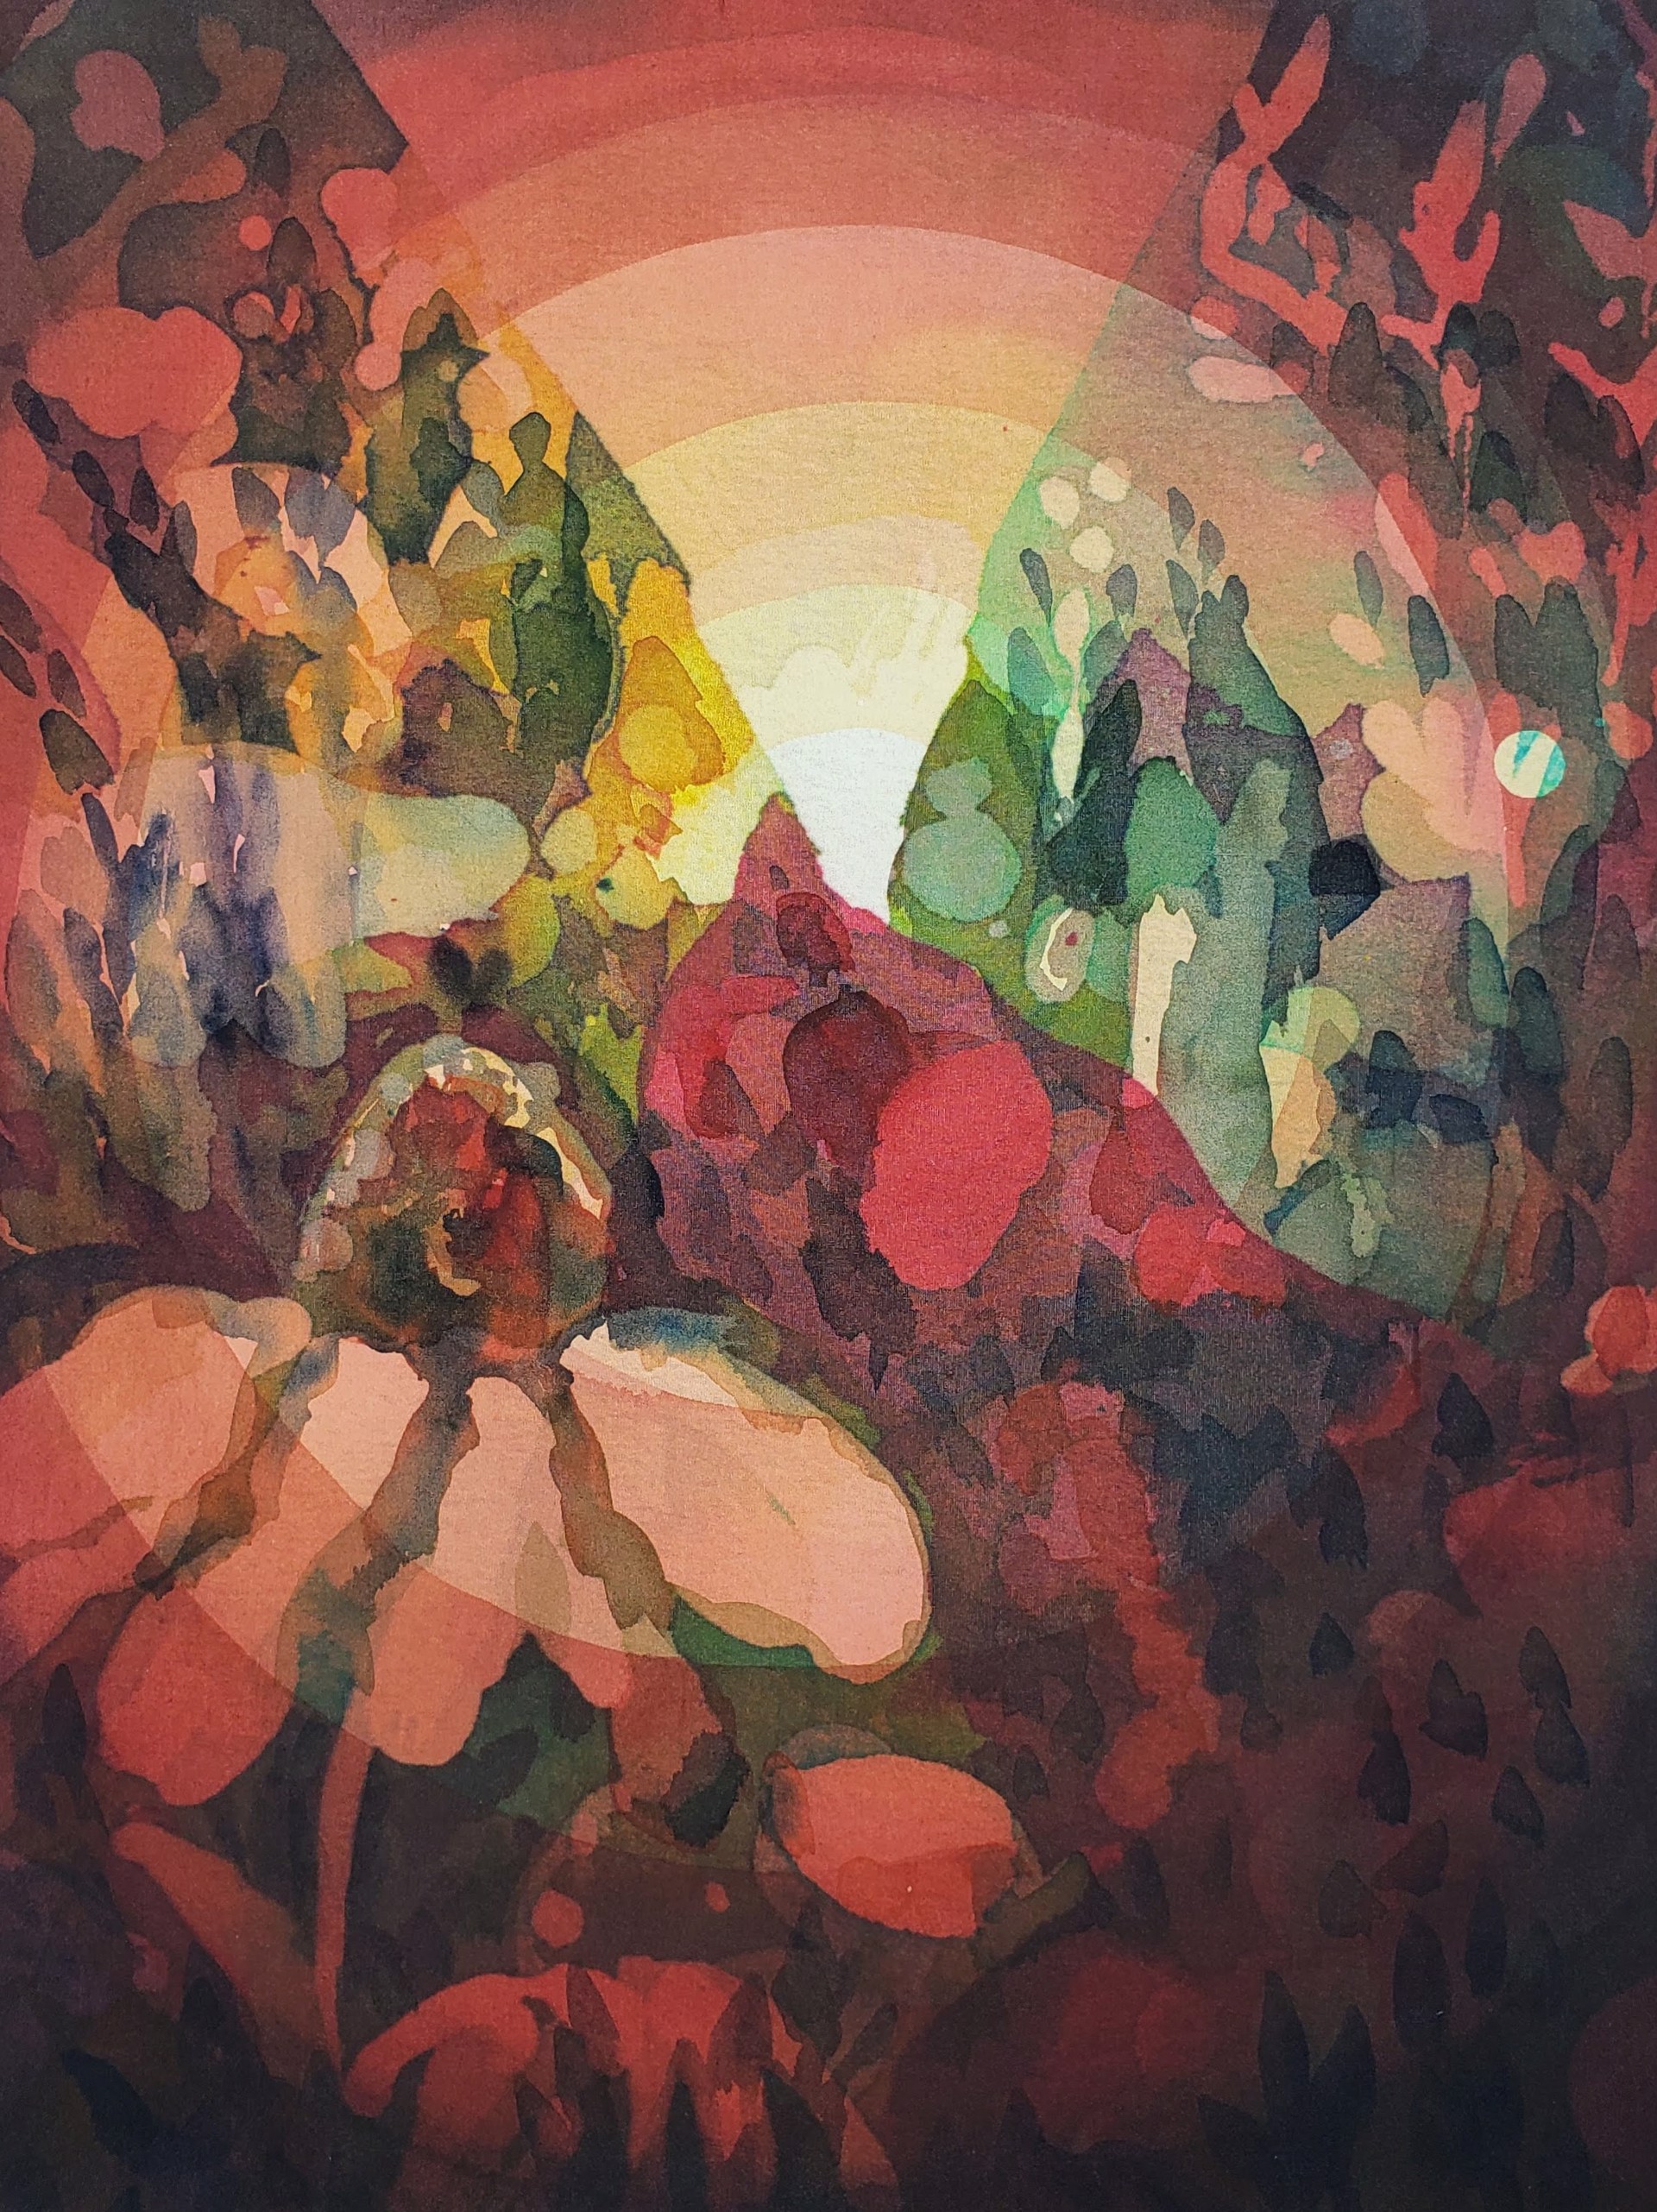 The Red Garden (Sunrise) by Laura Madera